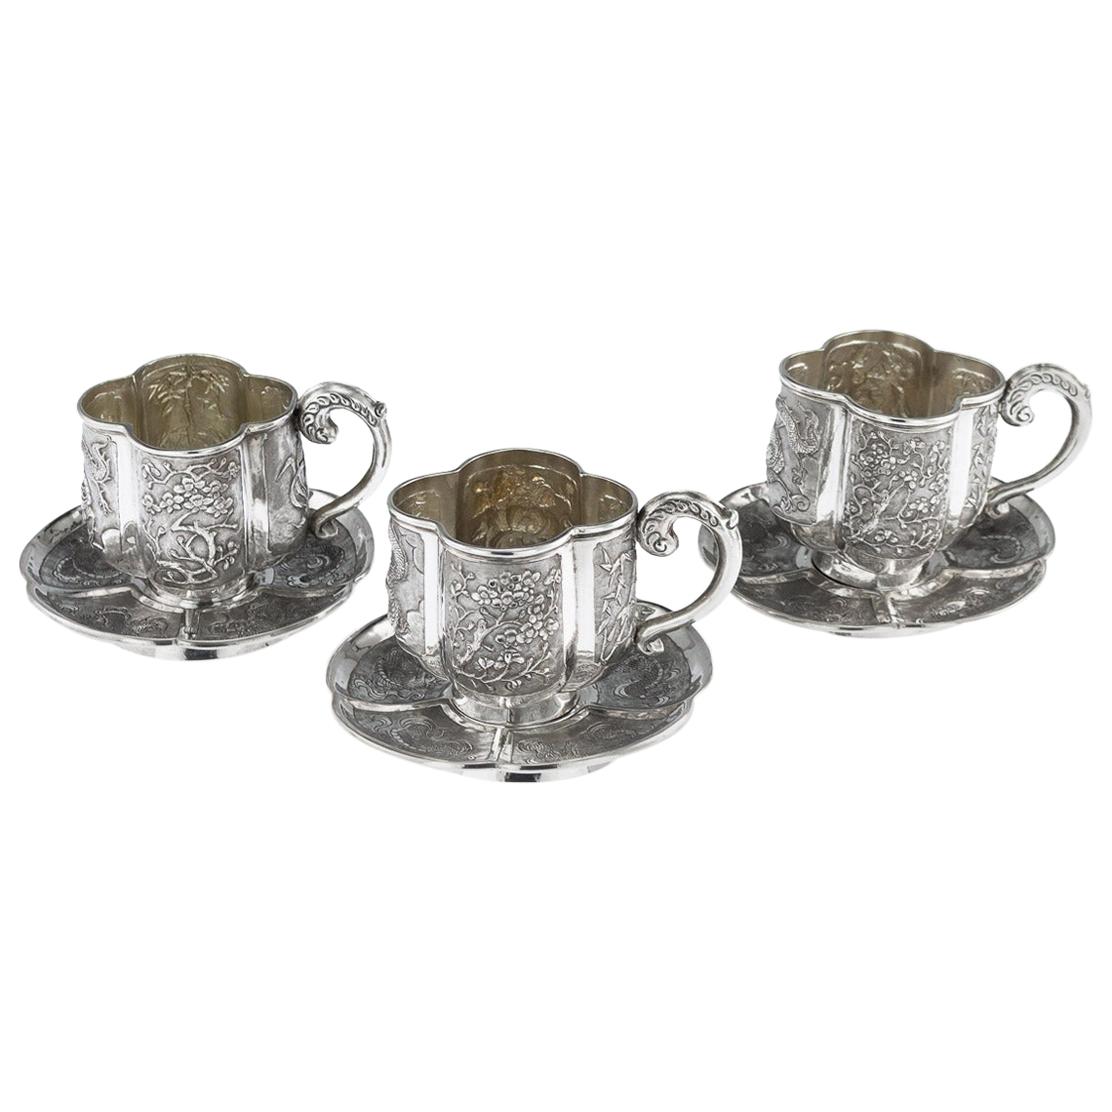 19th Century Chinese Solid Silver Three Tea Cups & Saucers, Nam-Hing, circa 1890